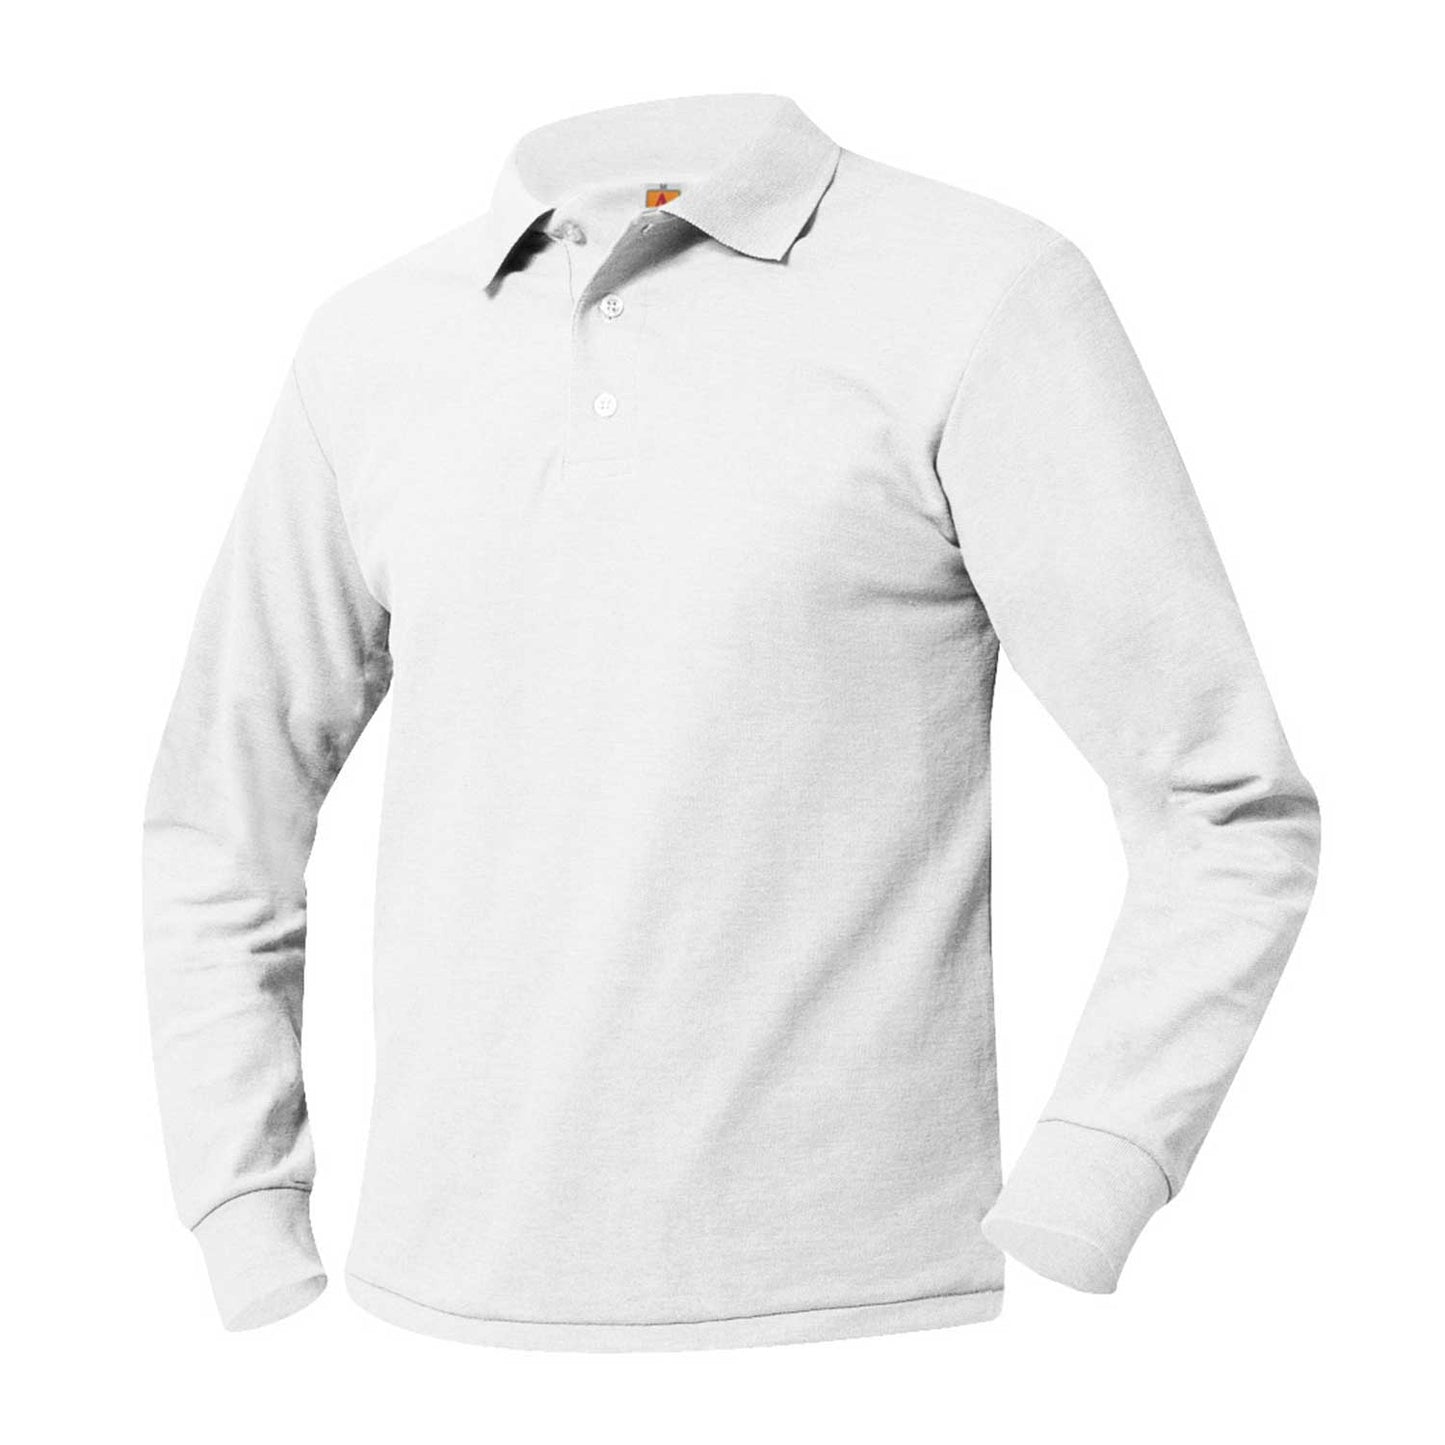 Men's/Unisex Pique Polo Shirt, Long Sleeves, Ribbed Cuffs - 1206